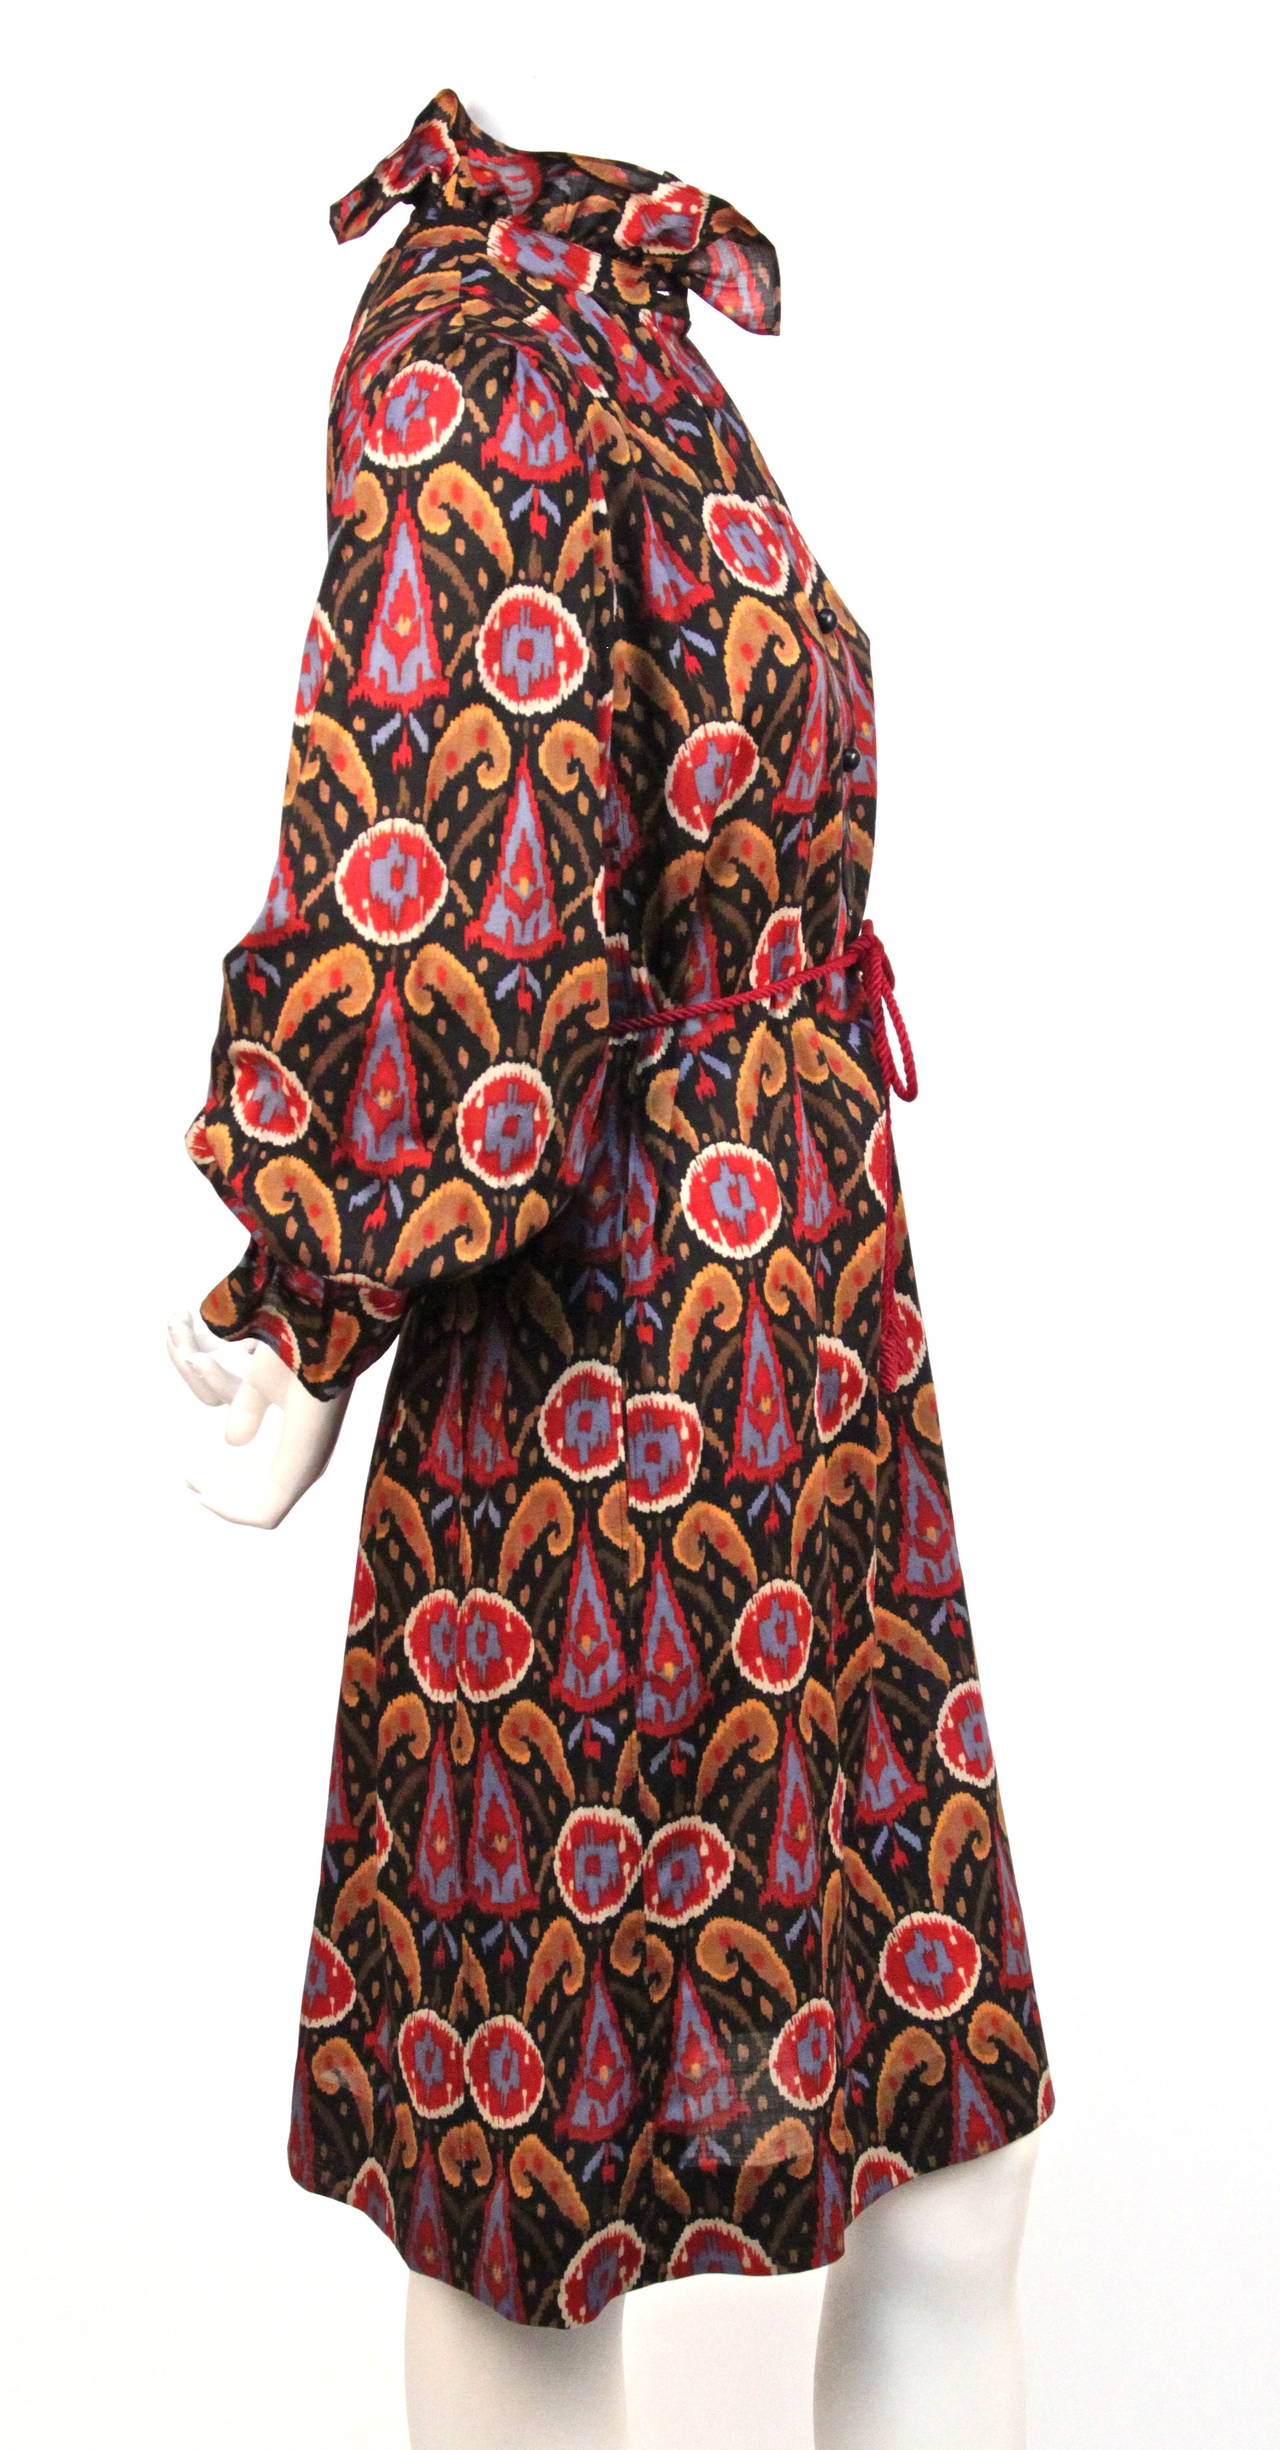 Vivid ikat printed wool challis dress from Yves Saint Laurent dating to the 1970's. Labeled a French size 34 however this will also fit a French 36 or possibly even a petite French 38. Slips on over the head with button front placket and buttons as